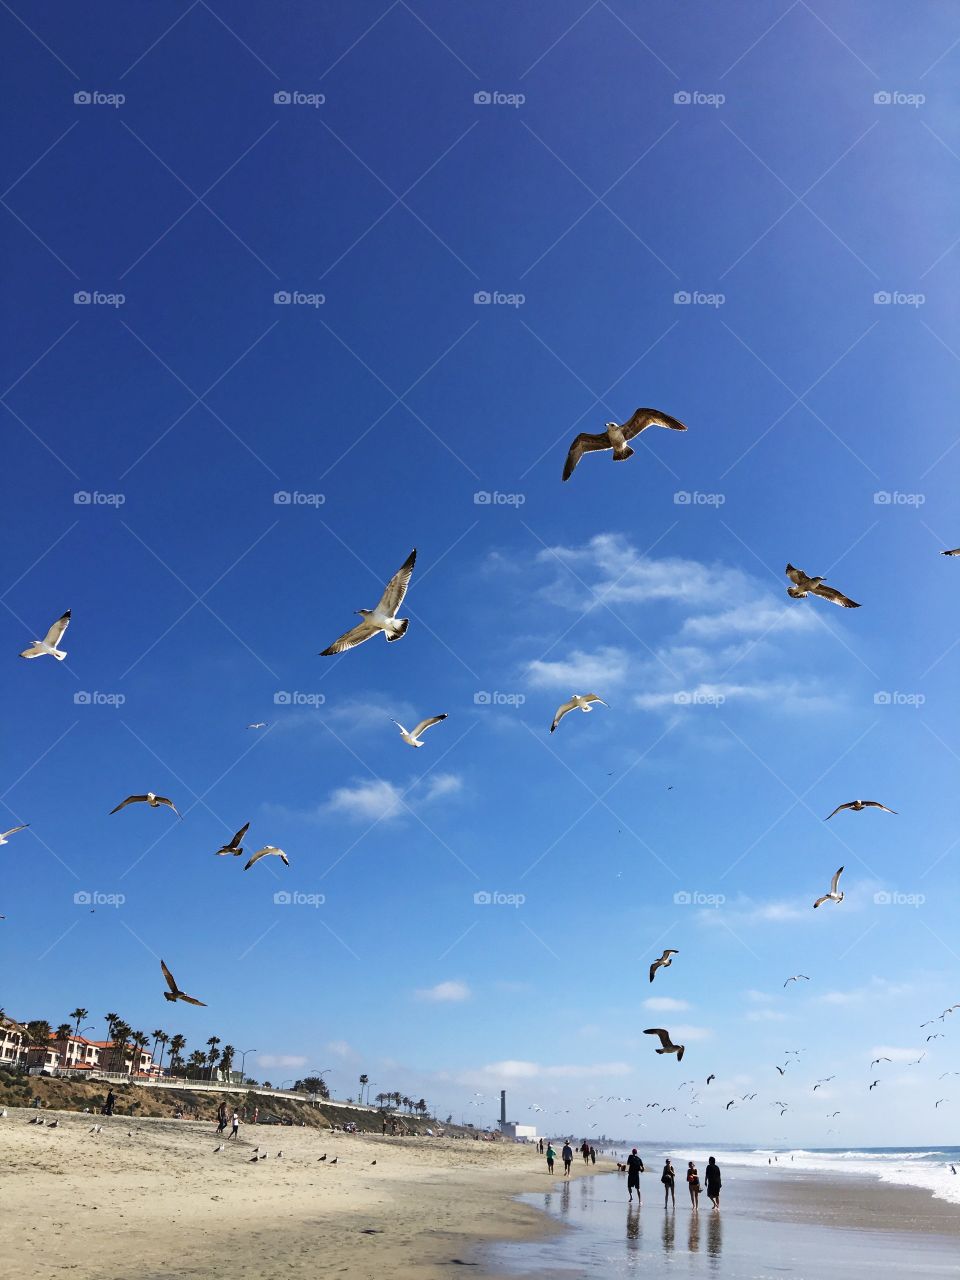 This photo captures a flock of seagulls flying across the shore of a California beach.